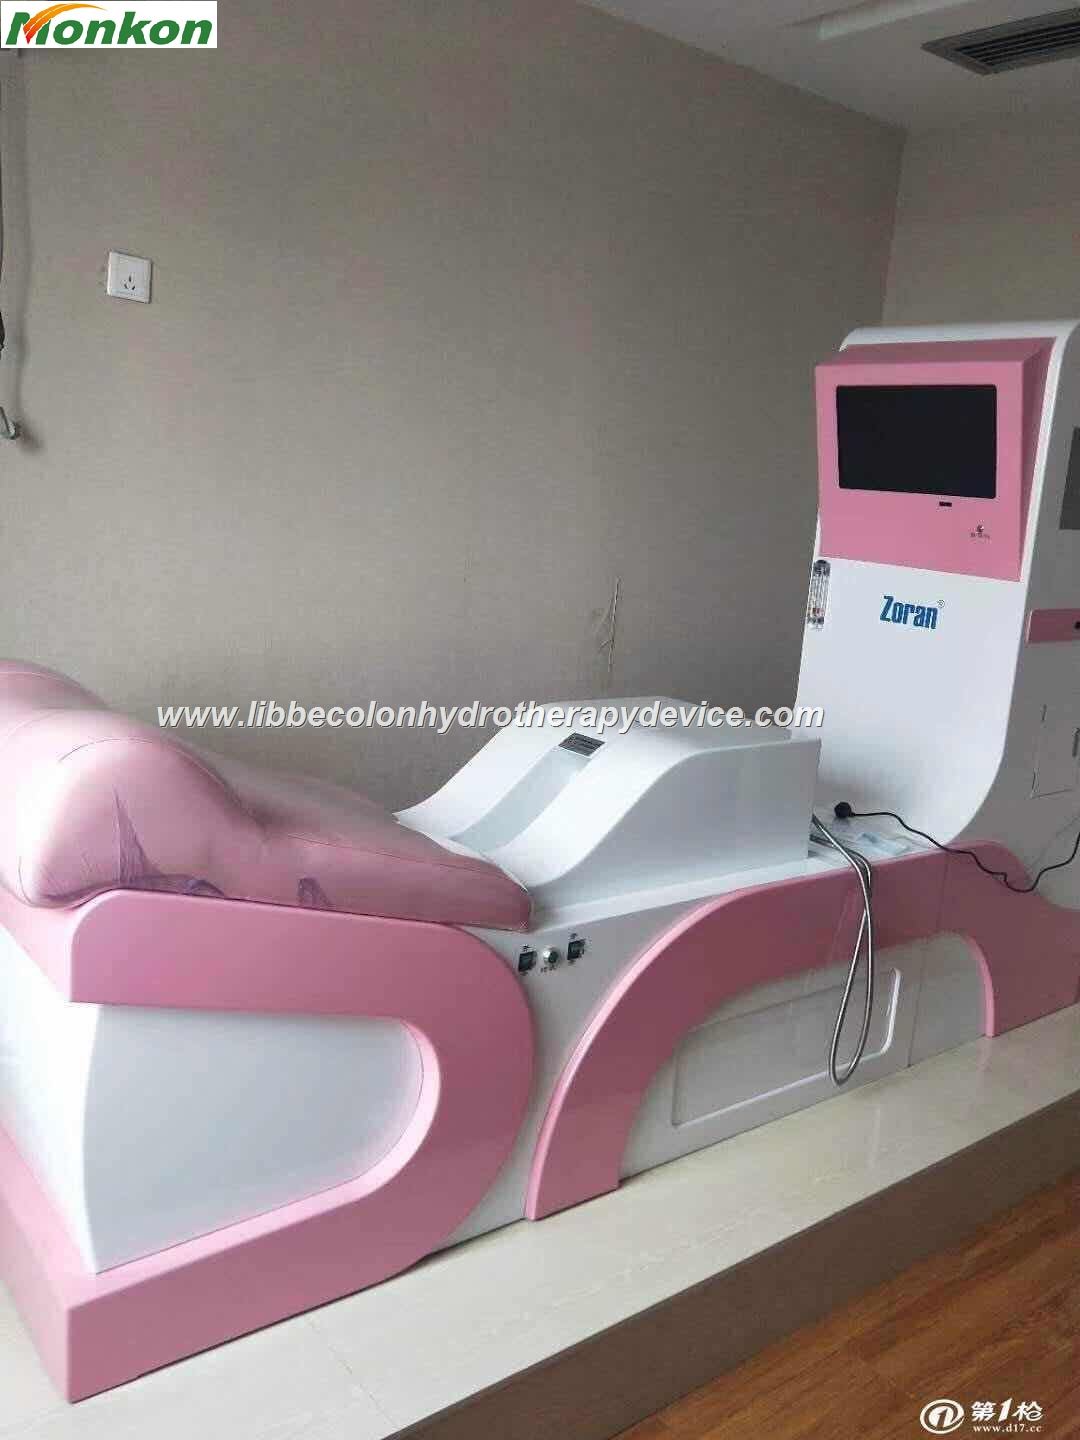 MAIKONG hydrotherapy colon machine colon cleanse pictures is colon hydrotherapy good for you